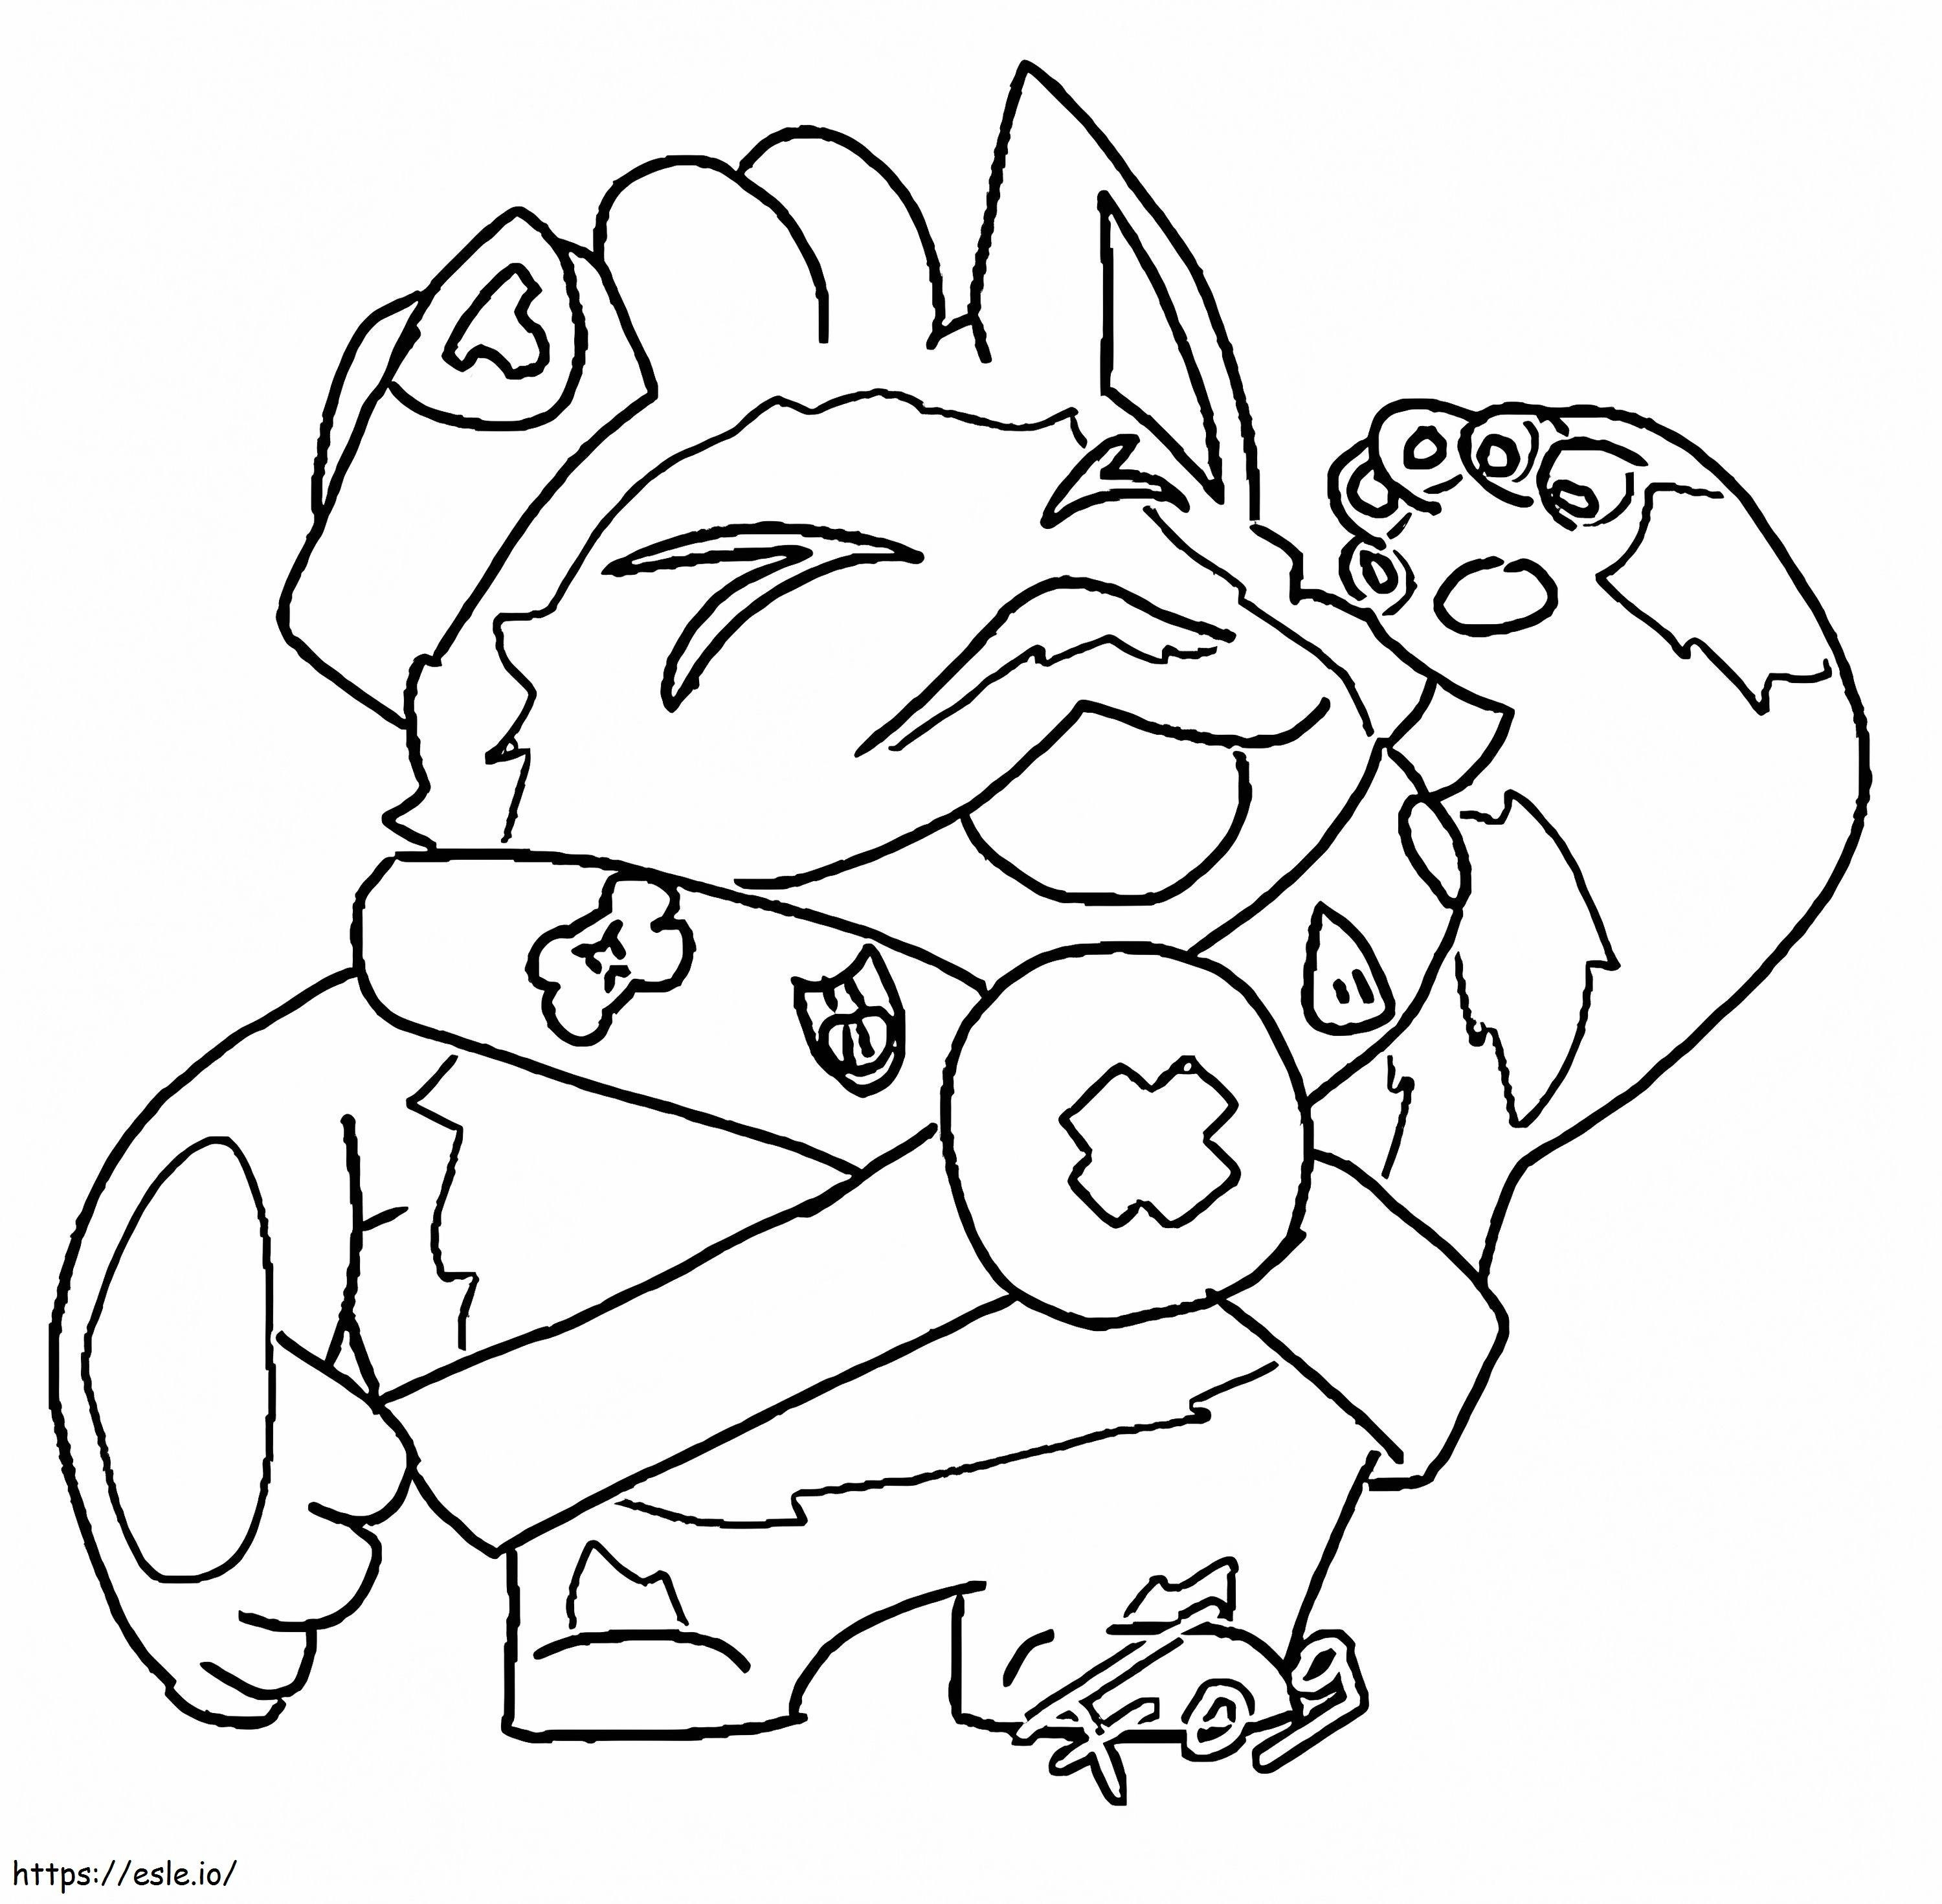 Squeak Brawl Stars To Color Coloring Page coloring page